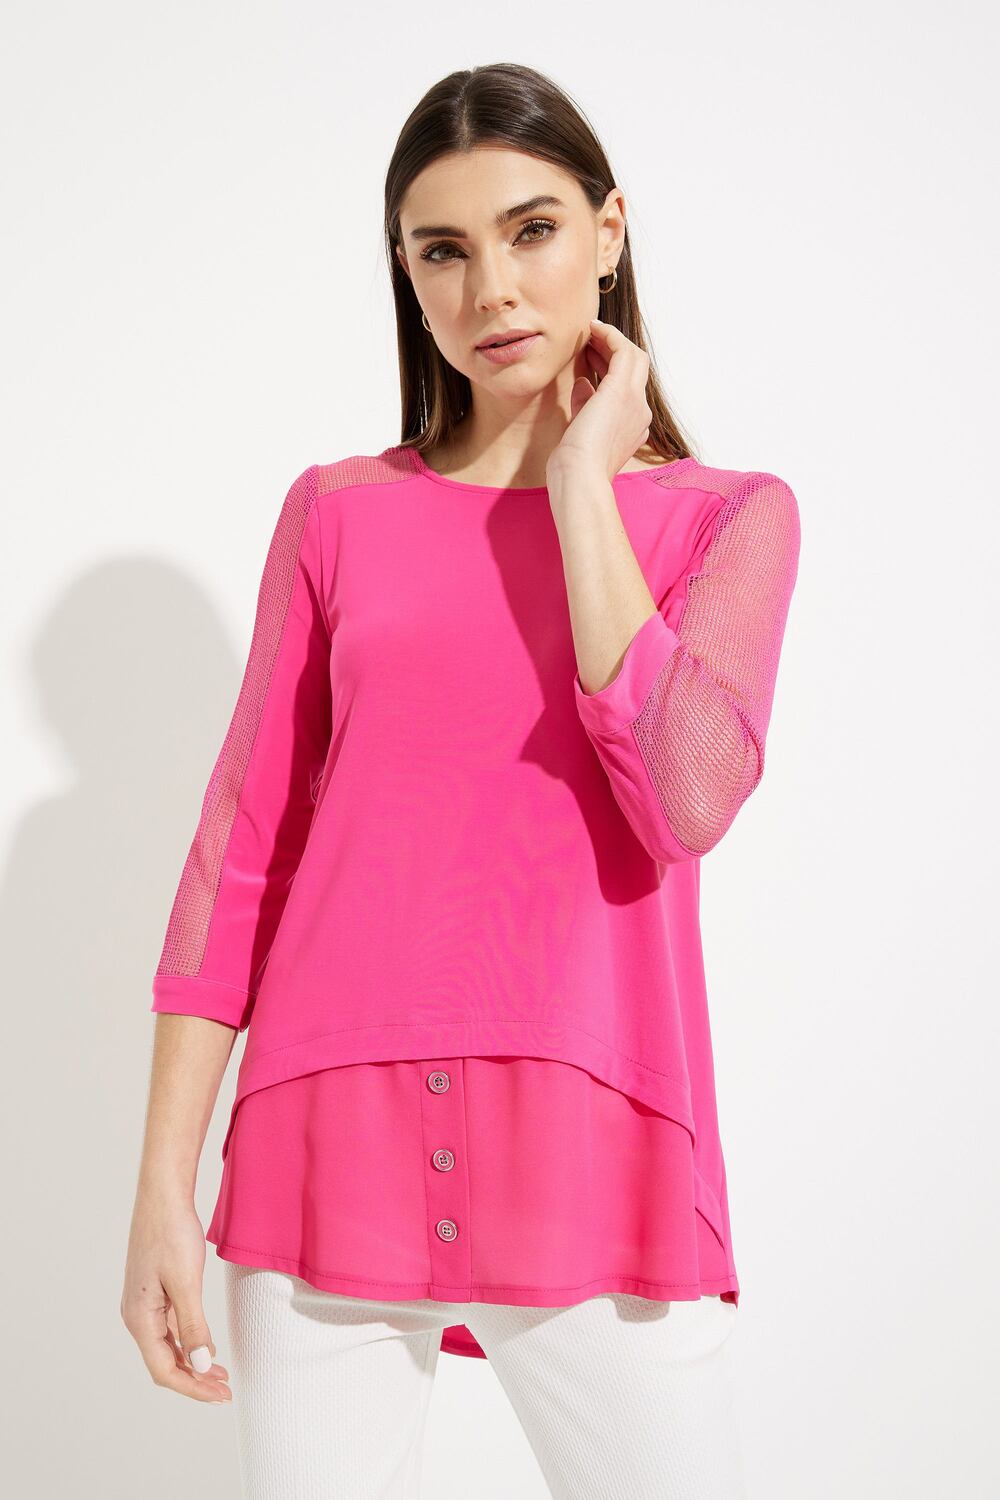 Button Detail High-Low Hem Top Style 231057. Dazzle Pink